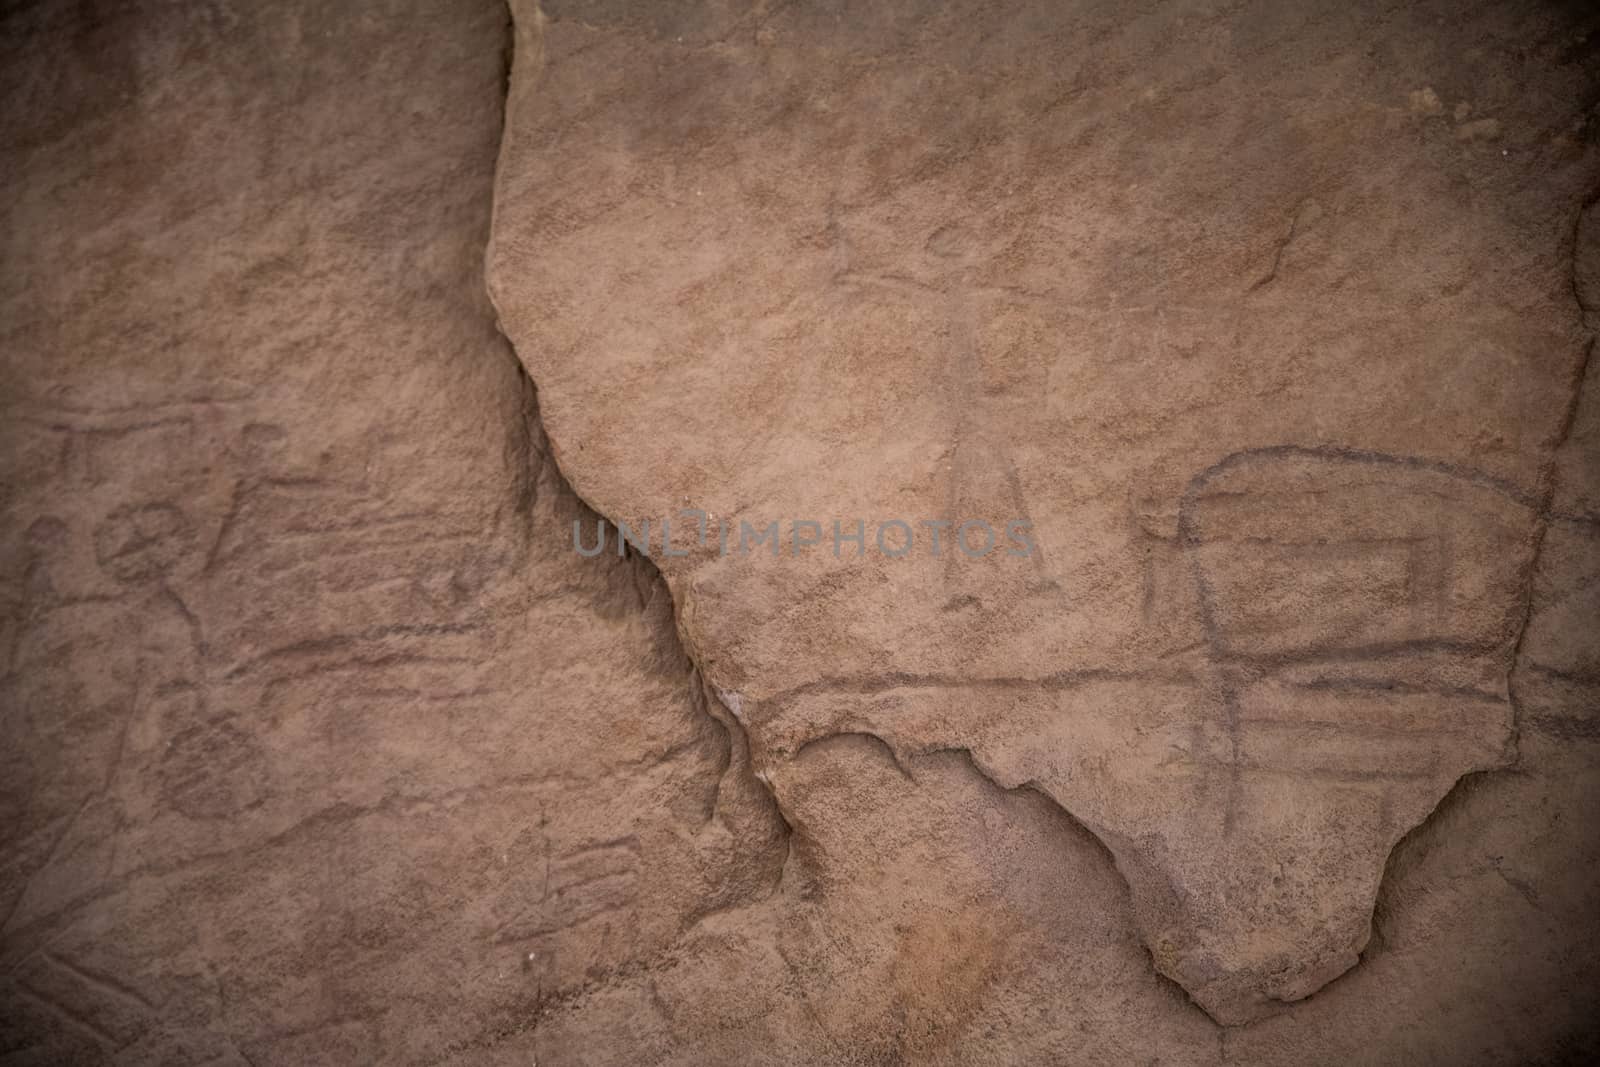 On the face of the external rock, dozens of rock drawings can be seen. Most of the drawings are of animals Ibex and ostrich deer and of hunters. On the rocks around are mining holes and tunnels.